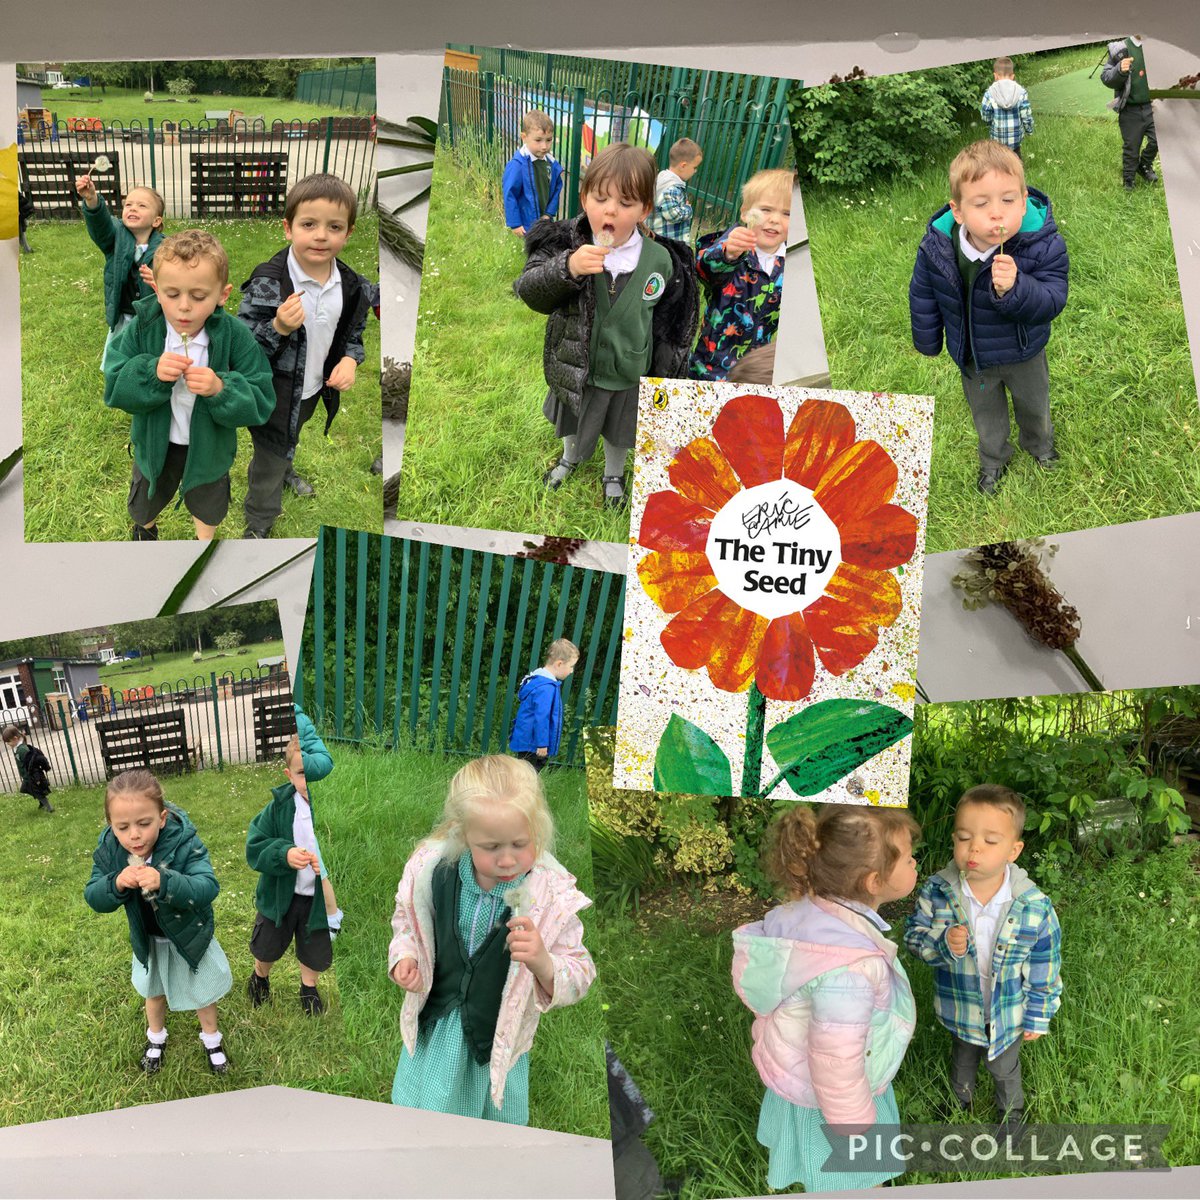 After reading #ATinySeed nursery have been outside trying to find seeds. We loved blowing them and watching them fly away in the wind. @StJosephStBede #sjsbReading #sjsbStBedeWeek #outdoorlearning #sjsbEYFS @carlemuseum